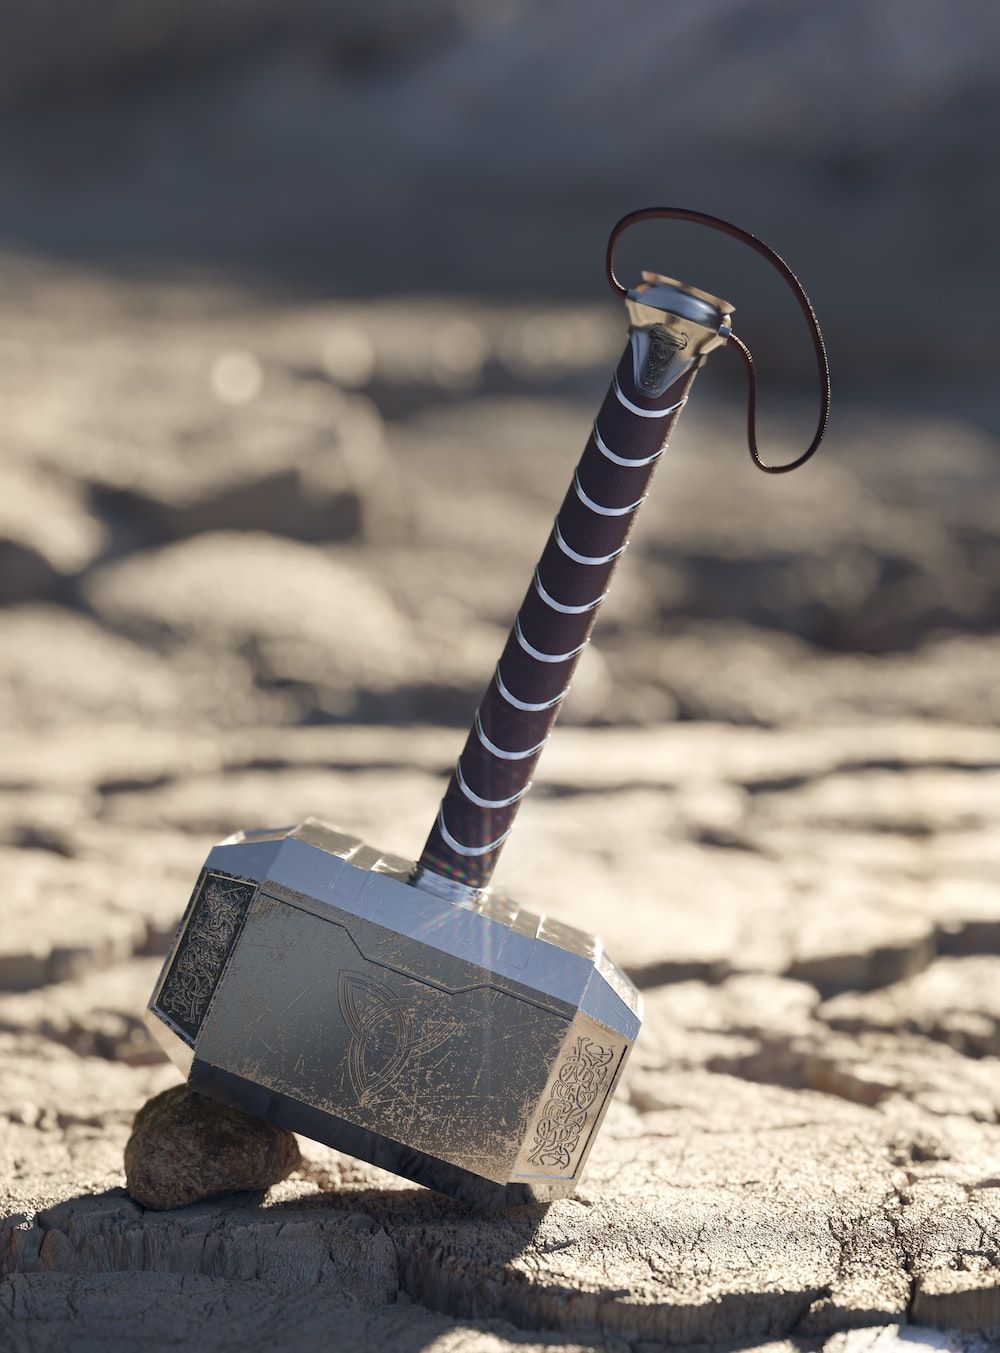 Thor Hammer Picture. Download Free Image